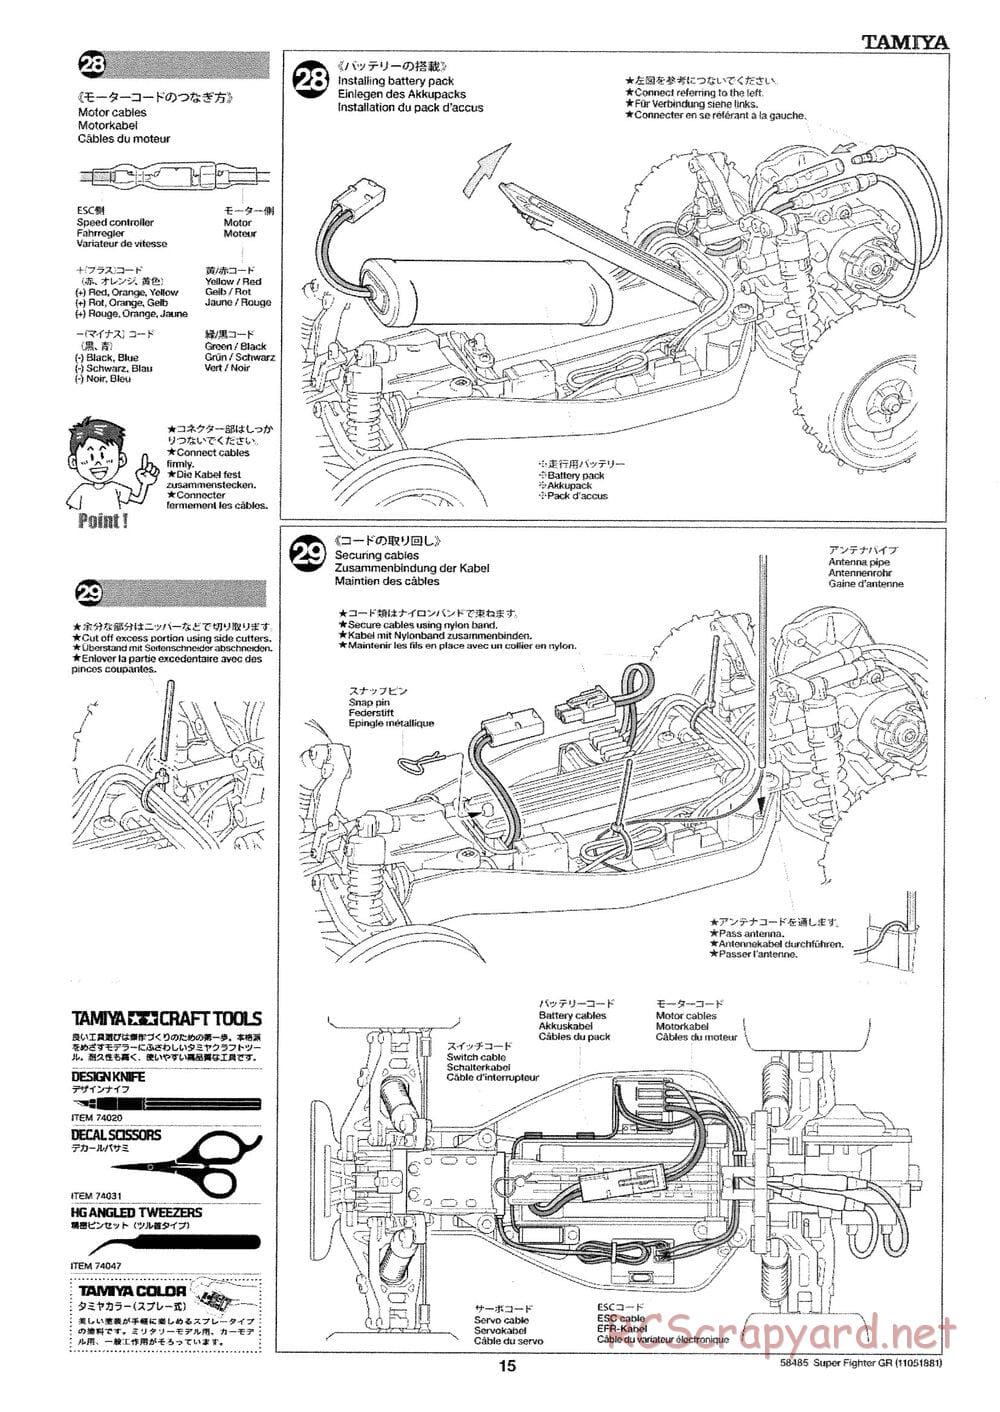 Tamiya - Super Fighter GR - DT-02 Chassis - Manual - Page 15